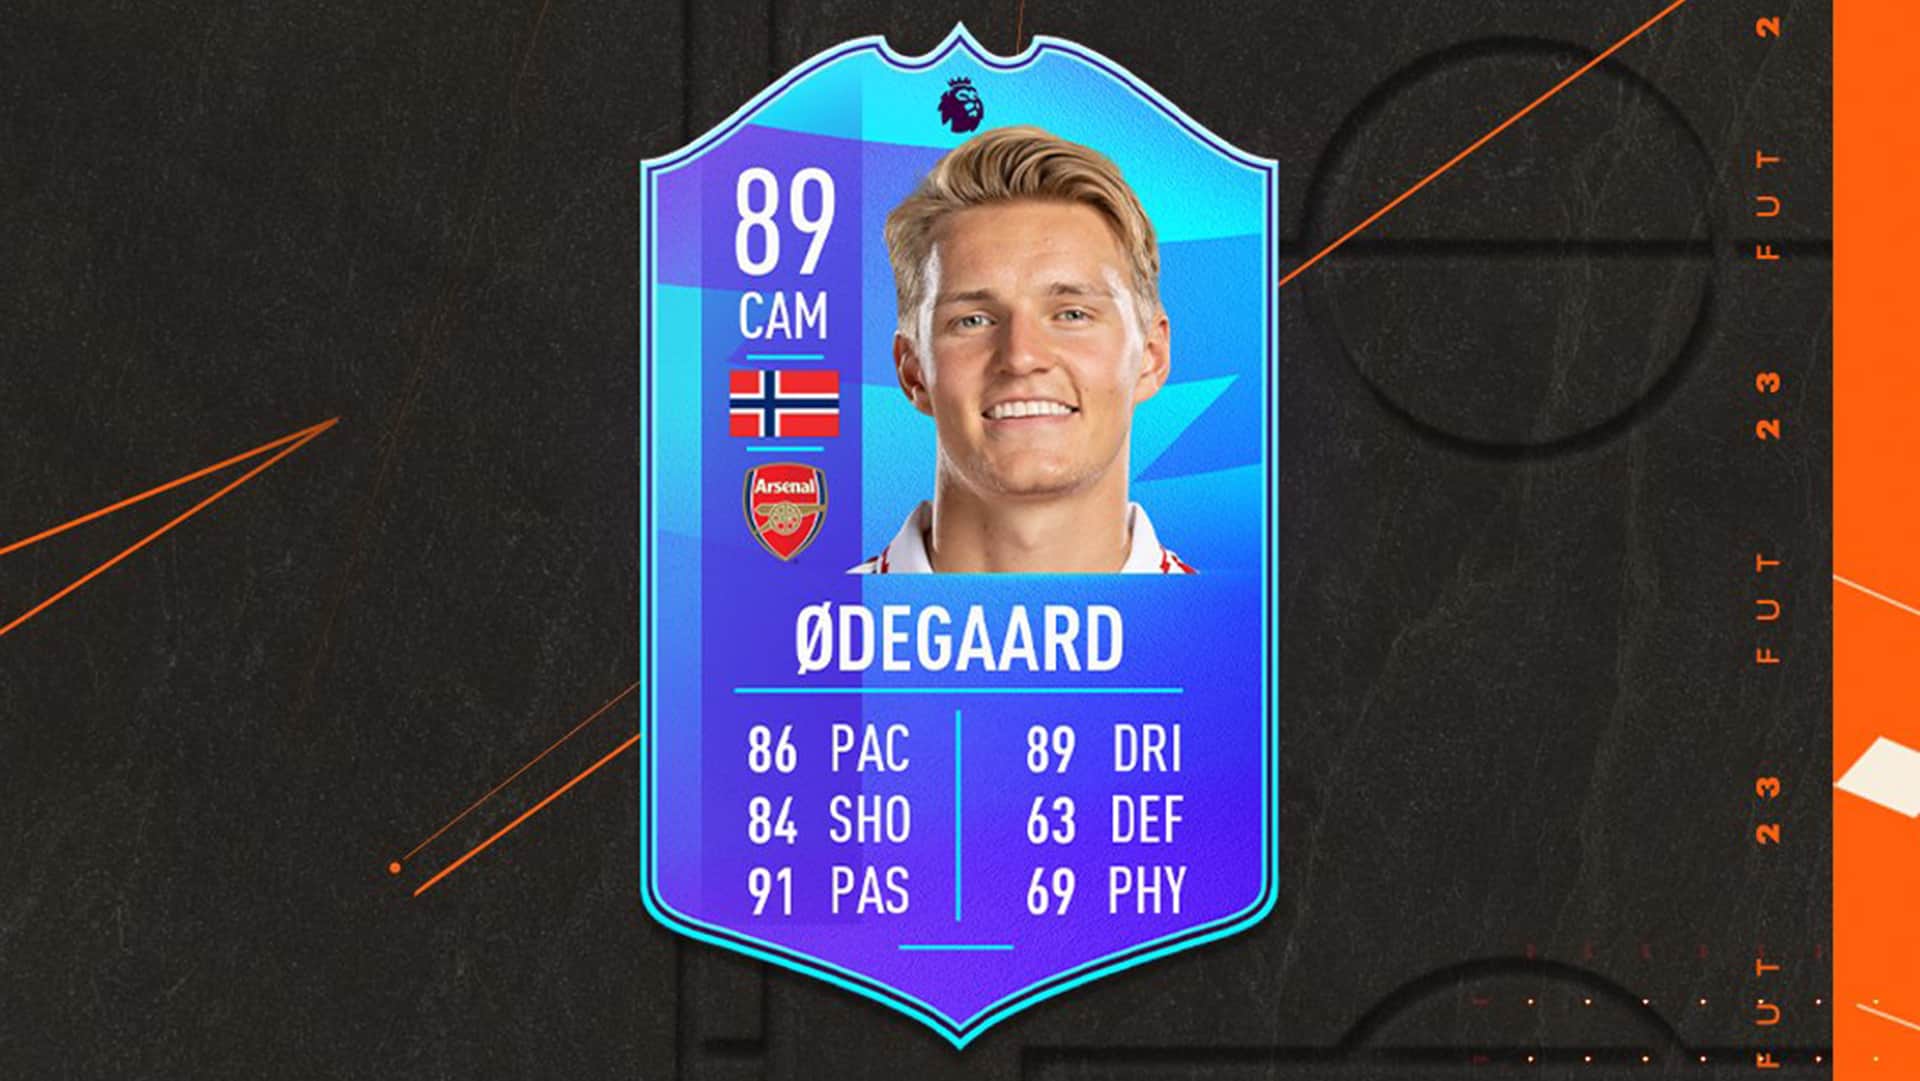 FUT Sheriff - Odegaard 🇳🇴 is coming as SBC during FUT